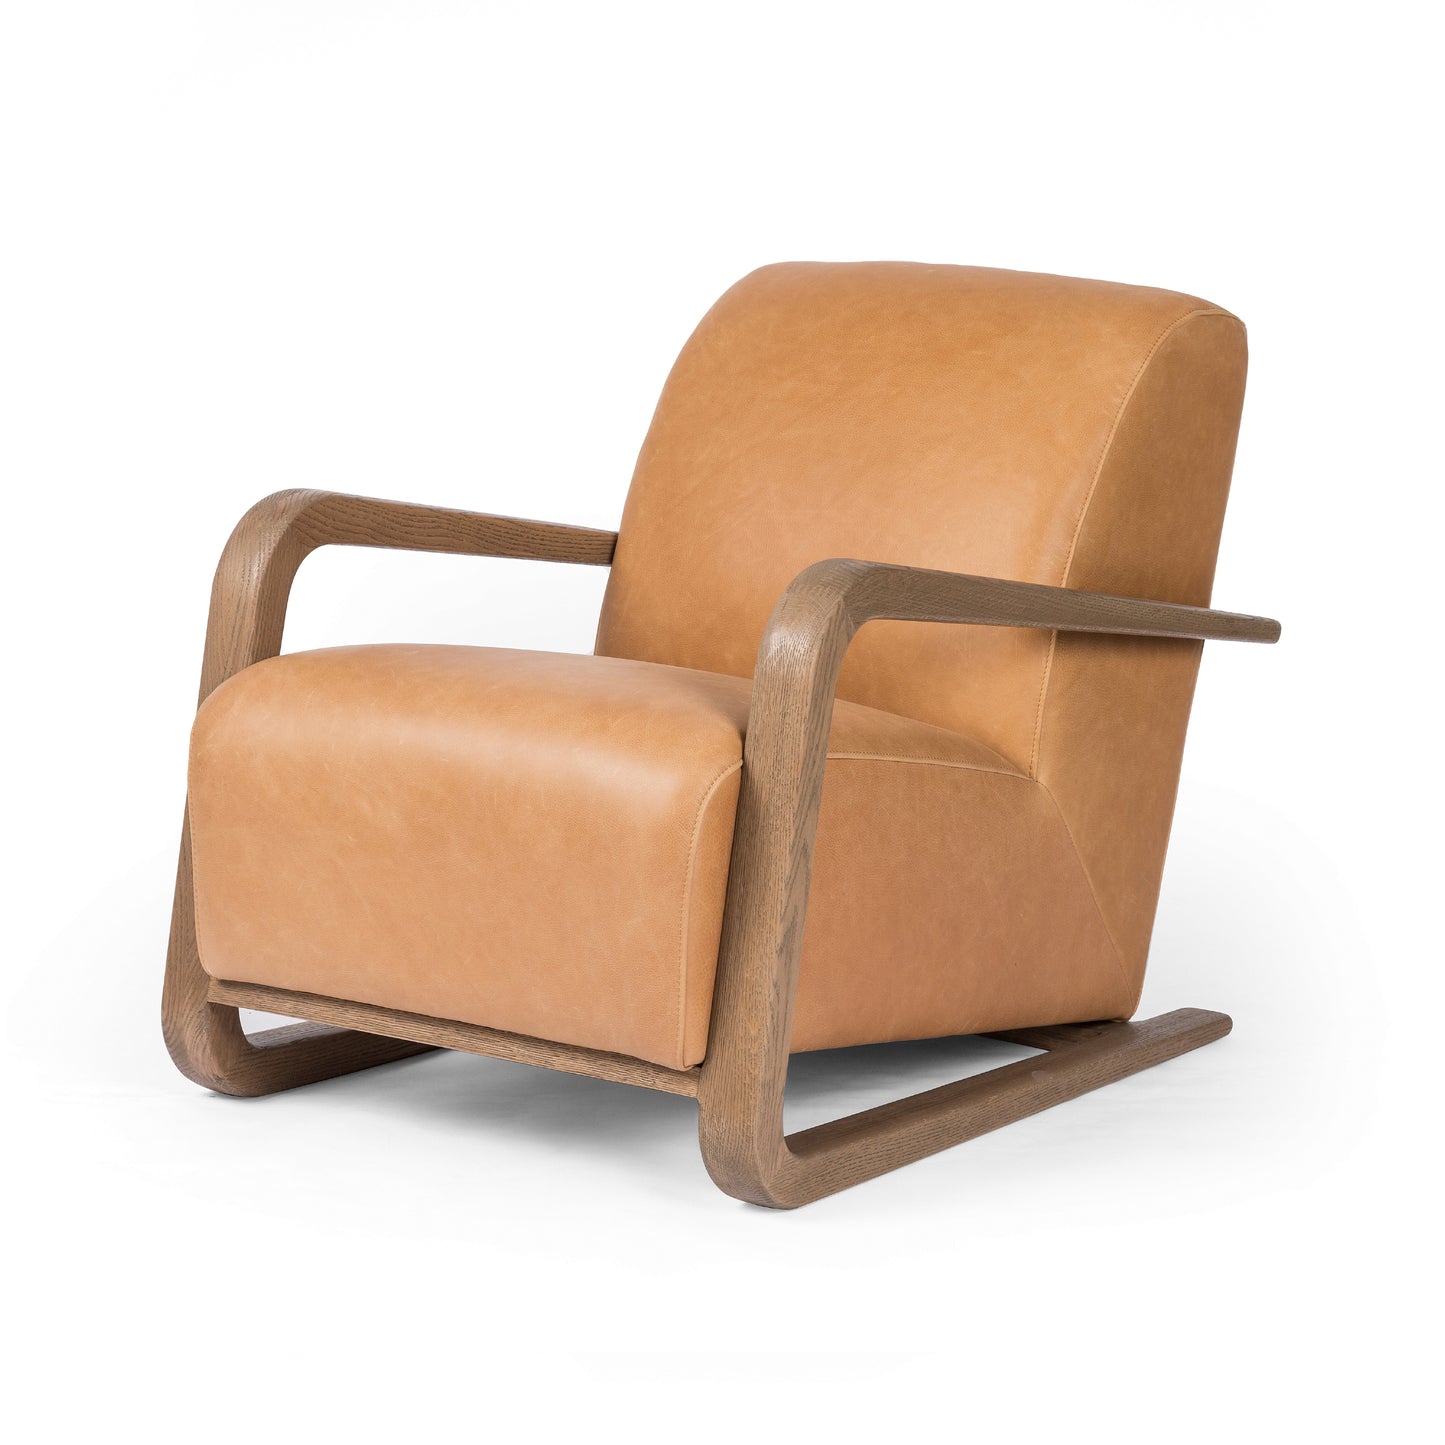 Load image into Gallery viewer, Rhimes Chair Palermo ButterscotchLounge Chair Four Hands  Palermo Butterscotch   Four Hands, Mid Century Modern Furniture, Old Bones Furniture Company, Old Bones Co, Modern Mid Century, Designer Furniture, https://www.oldbonesco.com/
